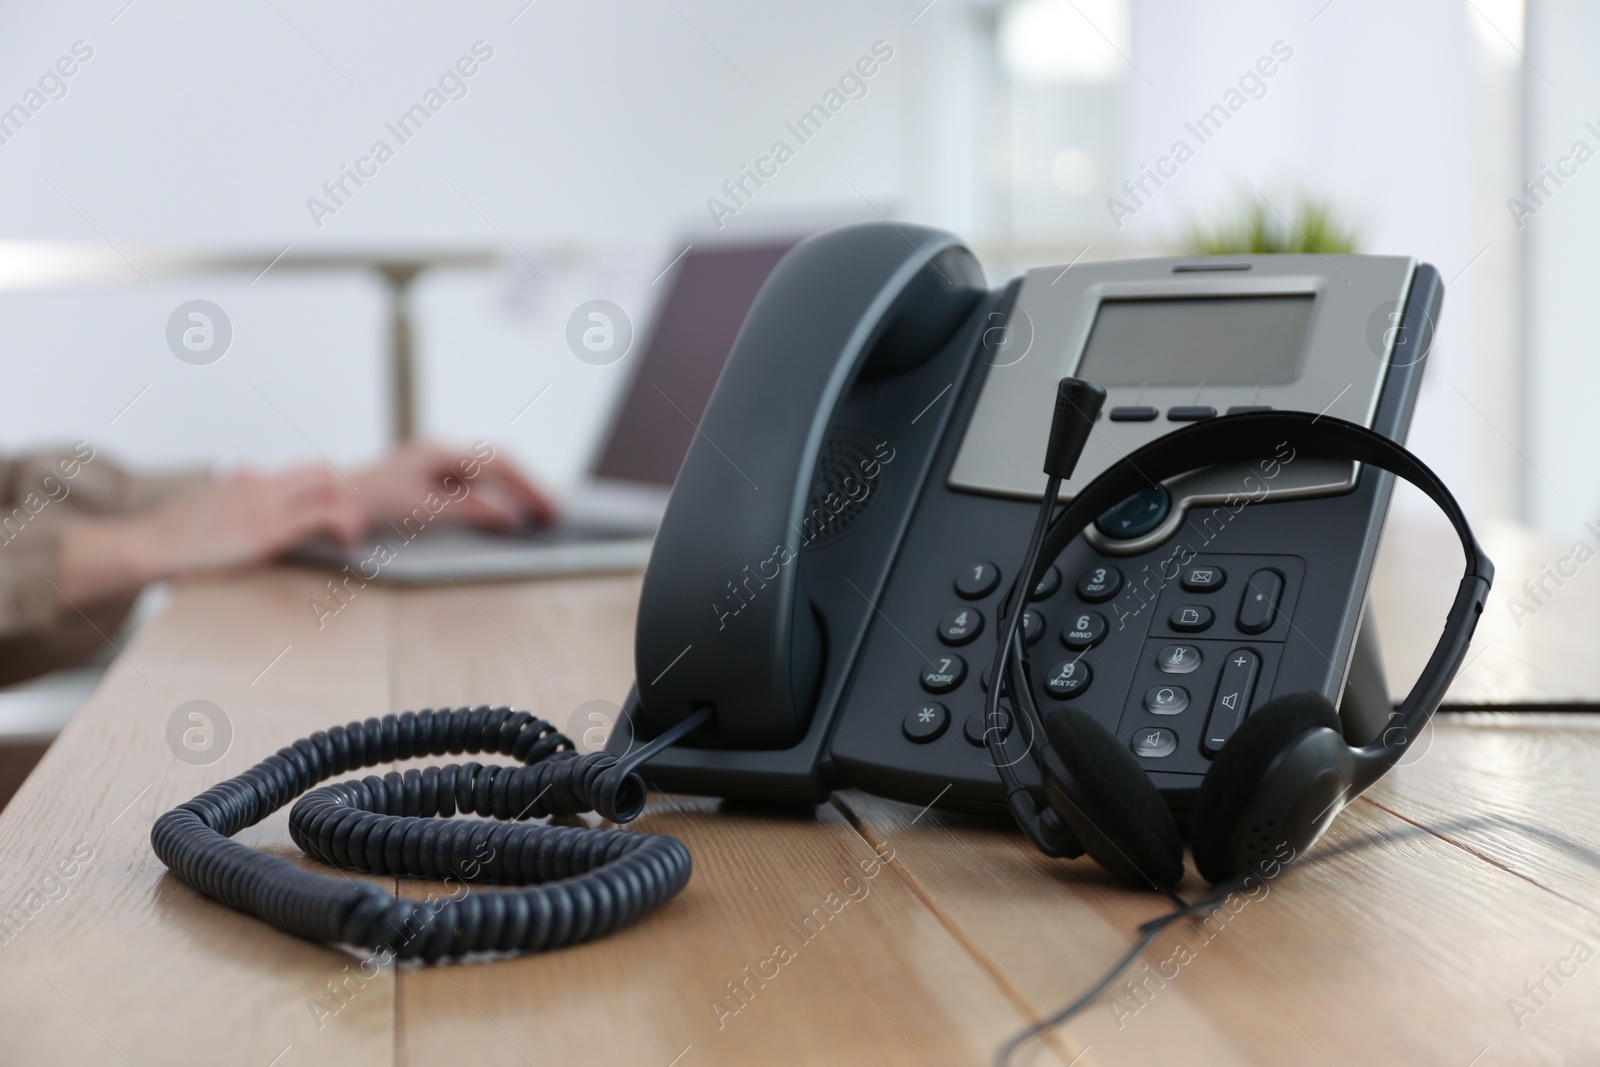 Photo of Desktop telephone with headset on wooden table in office. Hotline service